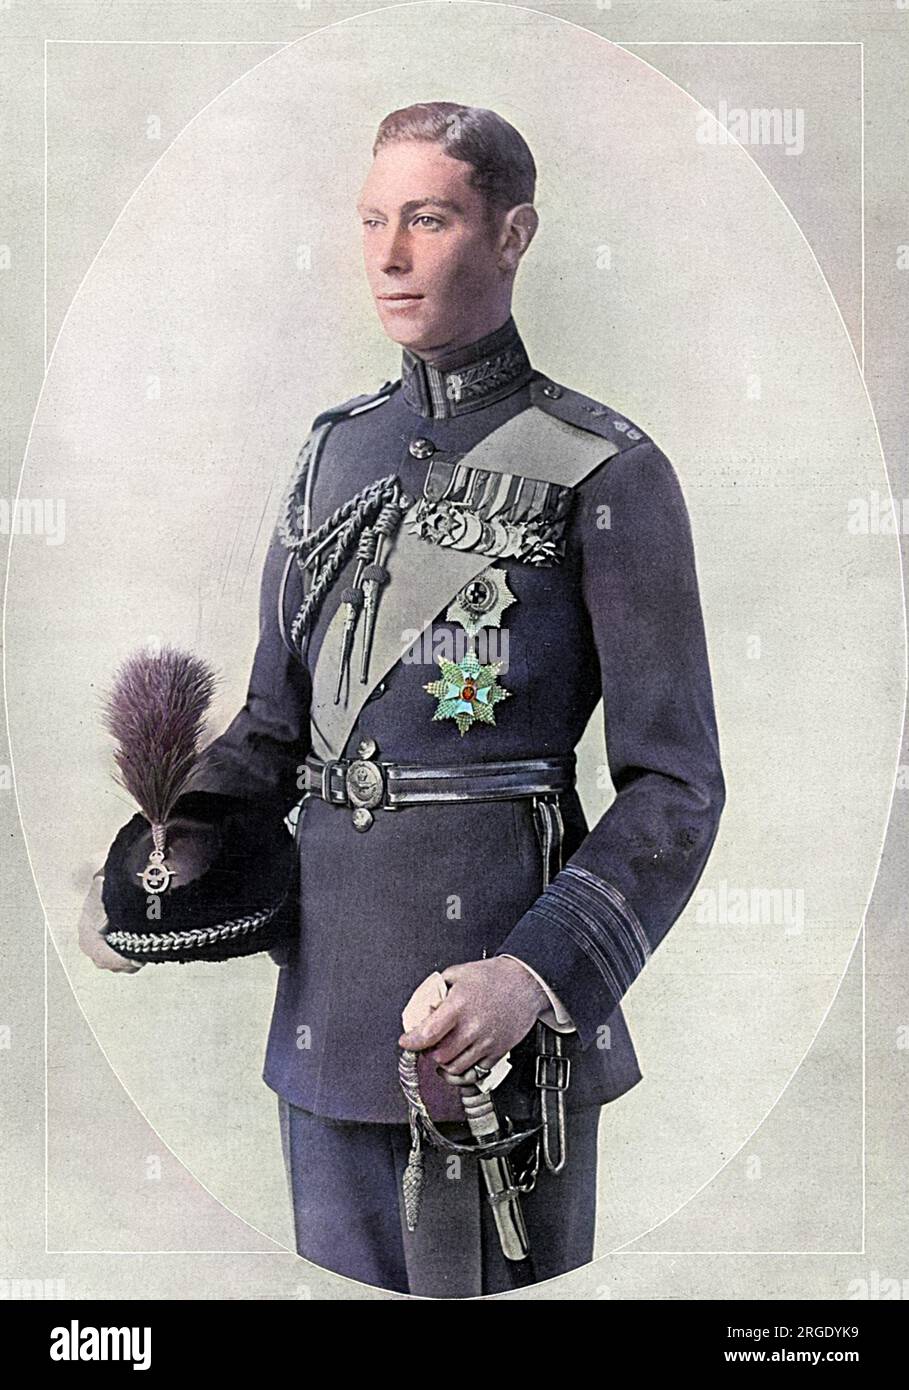 Prince Albert, Duke of York, later King George VI (1896-1952), pictured in the uniform of a Group Commander in the Royal Air Force, the uniform he chose for his wedding to Lady Elizabeth Bowes-Lyon in April 1923. Stock Photo